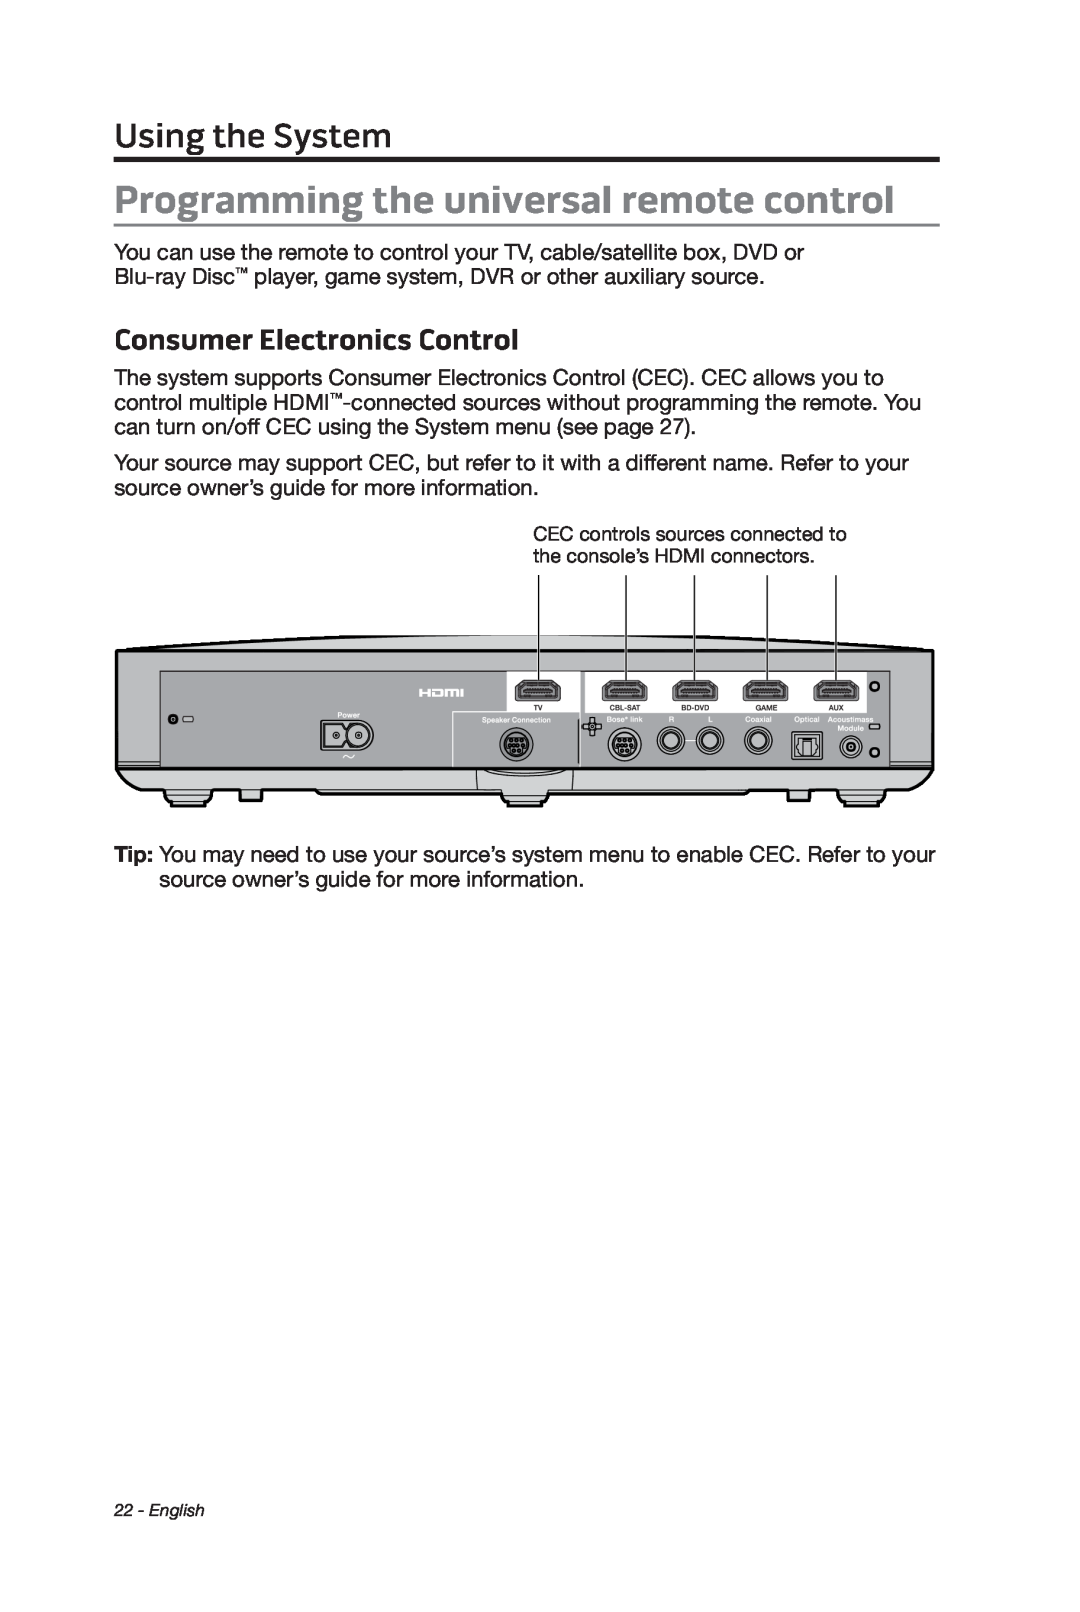 Bose cinemate manual Programming the universal remote control, Consumer Electronics Control, Using the System 